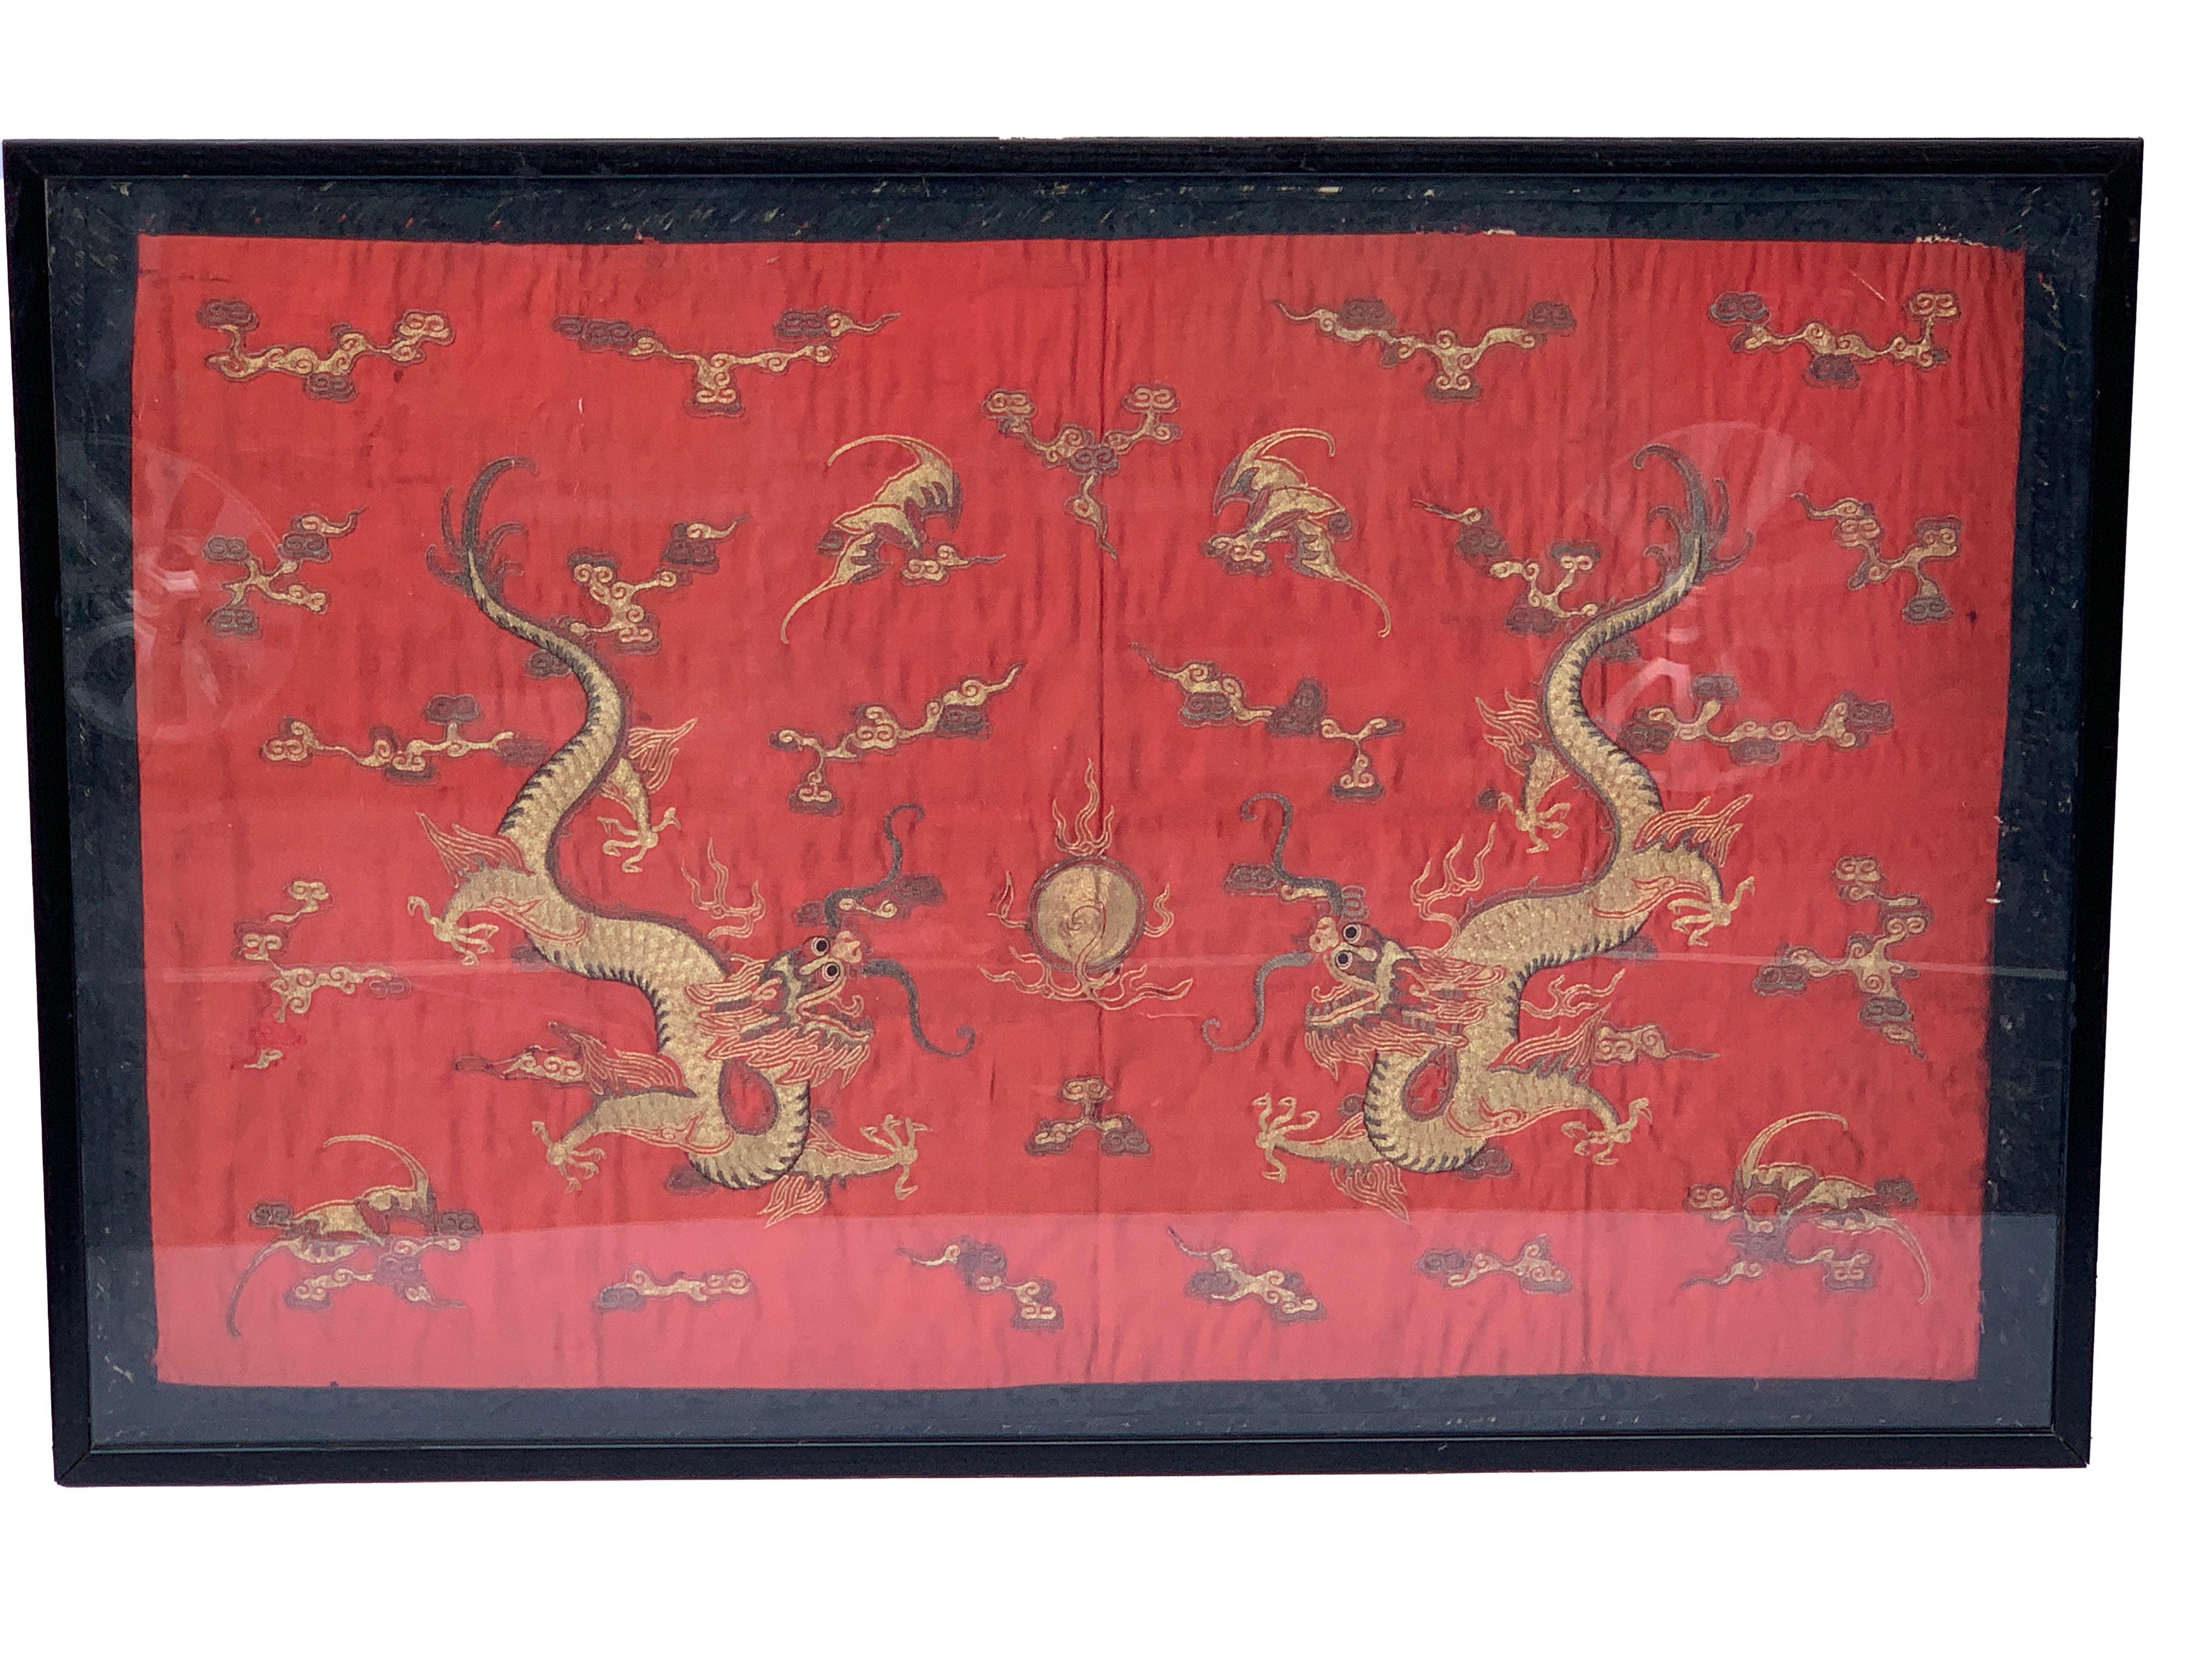 Chinese red silk dragon embroidery, with red background two floating central dragons.
Measures: Silk 36